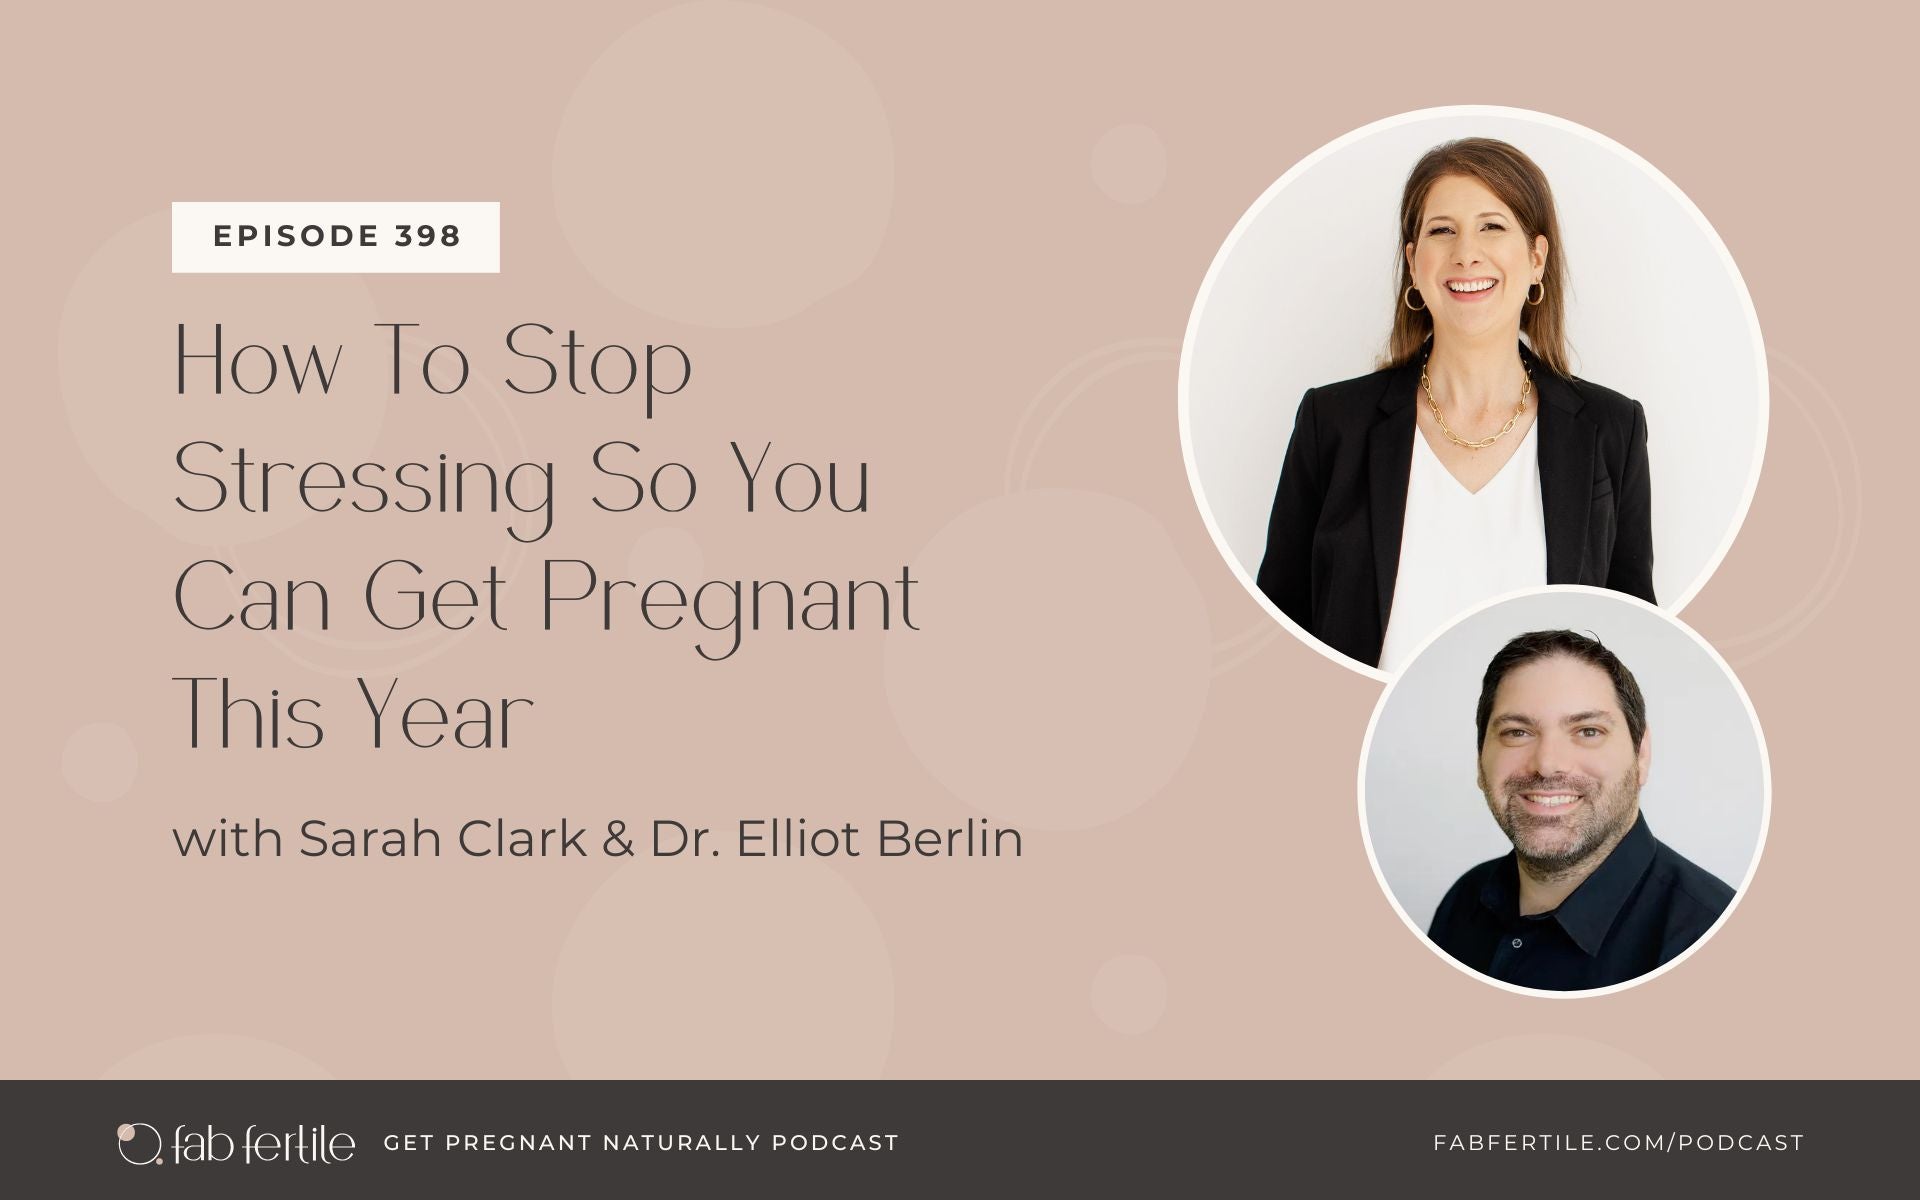 How To Stop Stressing So You Can Get Pregnant This Year